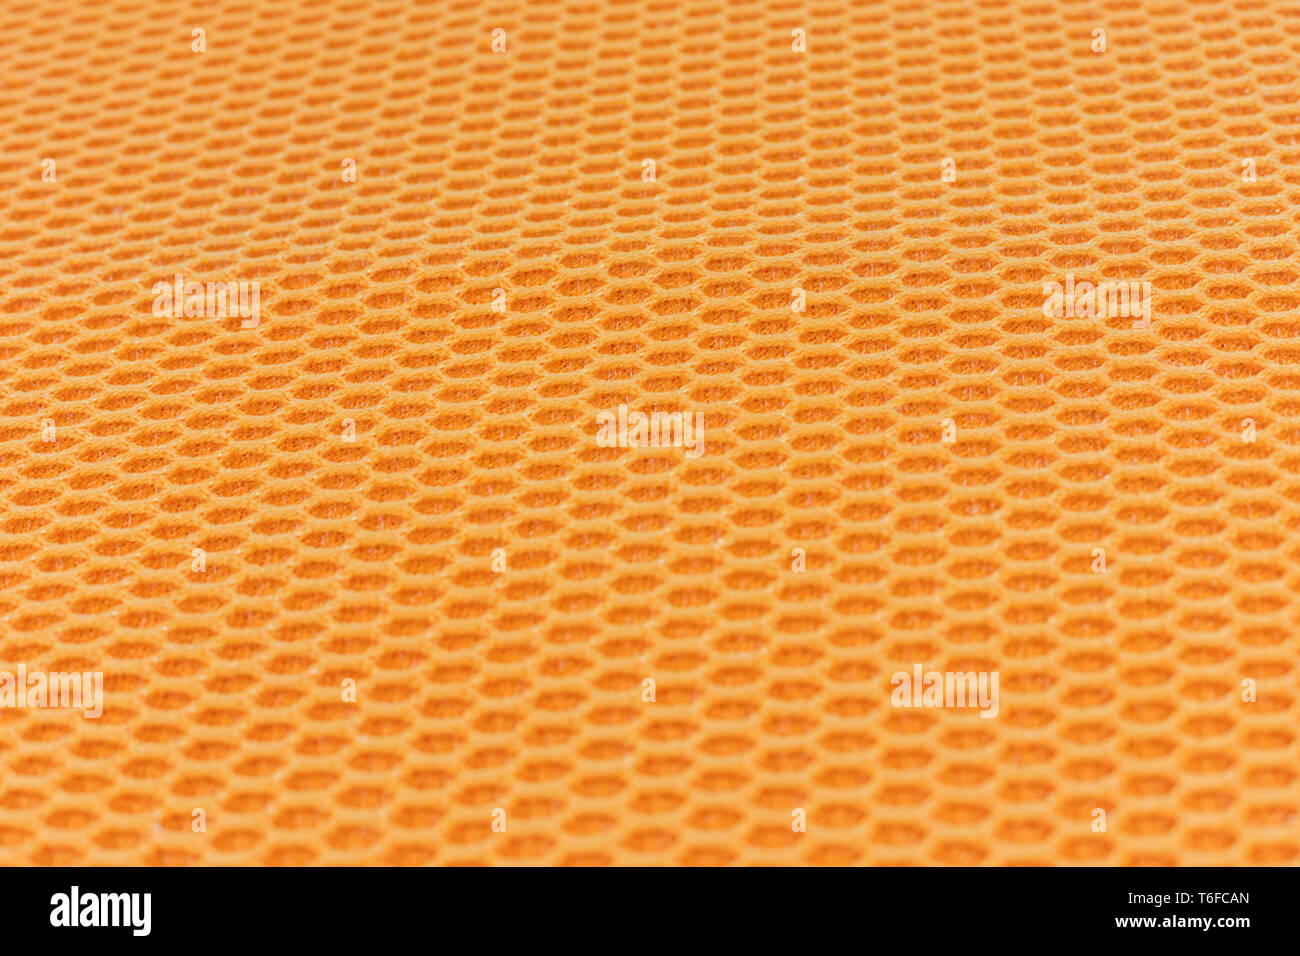 Honeycomb textured cloth flat lay, interesting hexagonal repeating pattern orange and yellow in colour Stock Photo